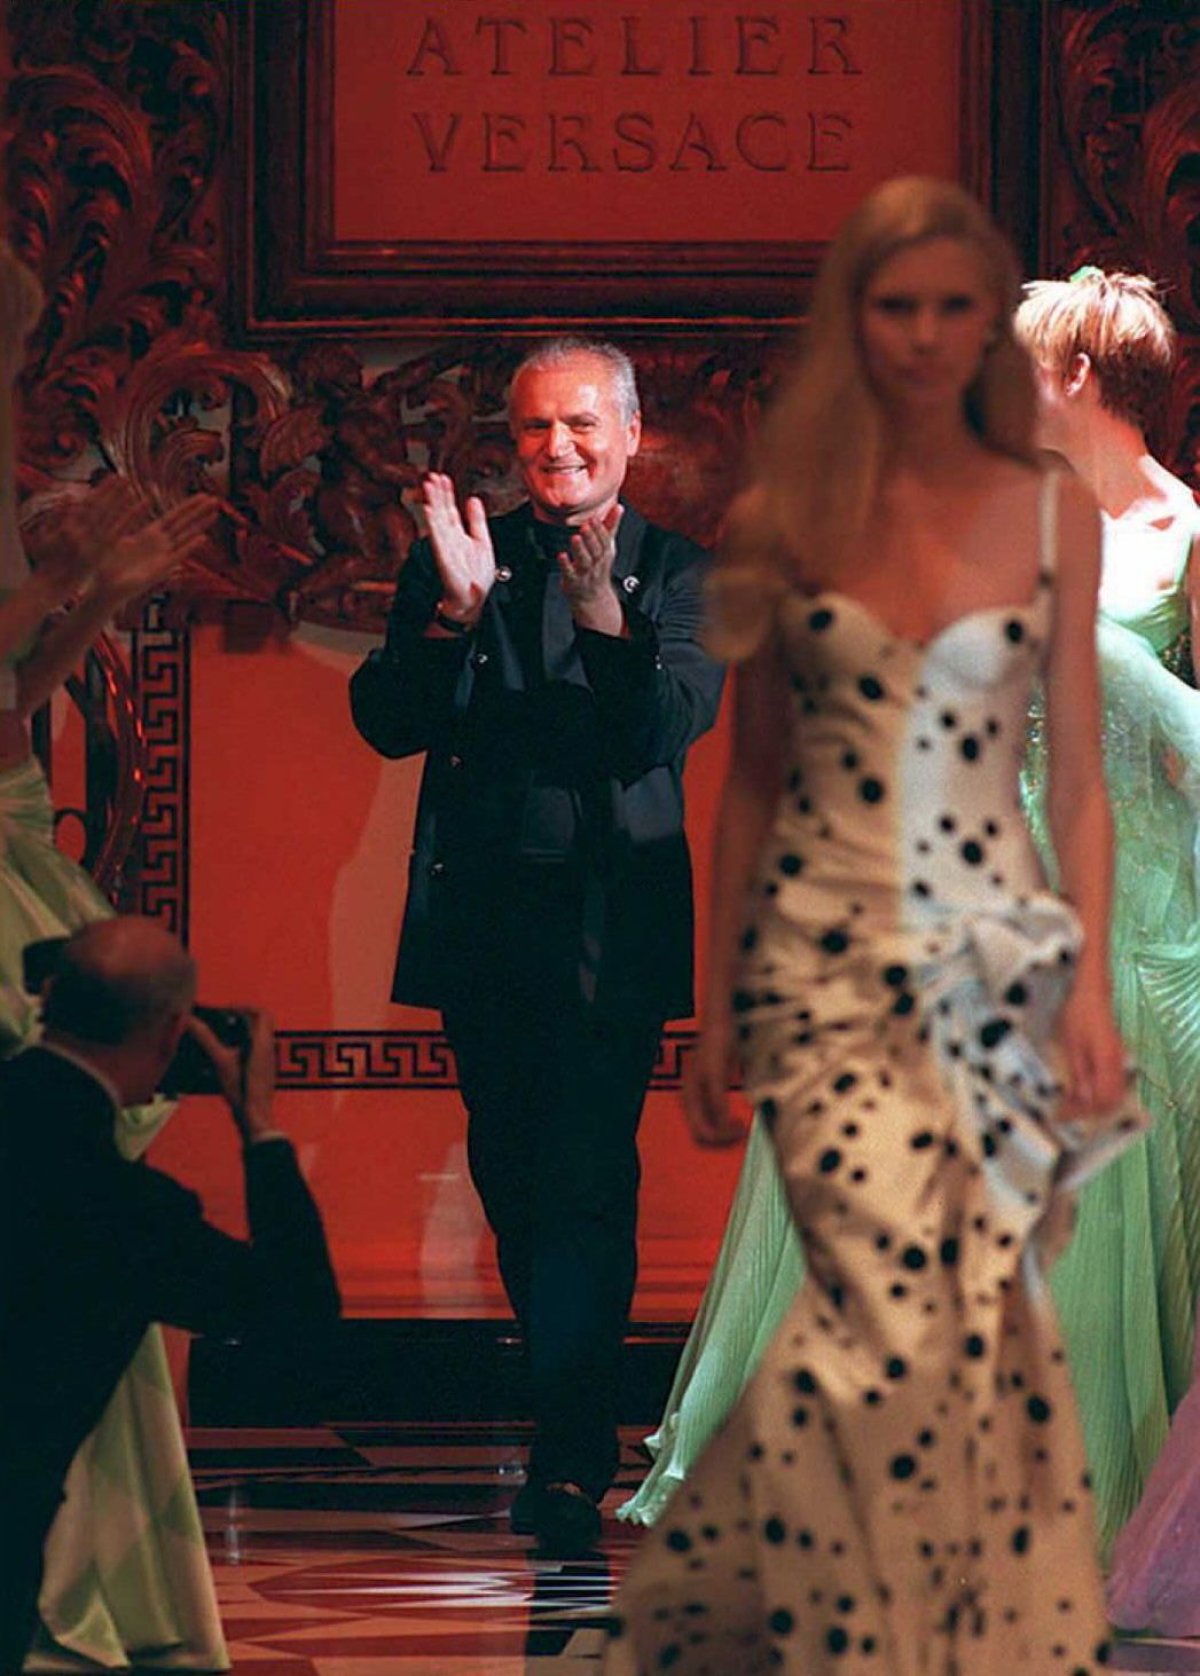 Gianni Versace presents atelier collection in 1995